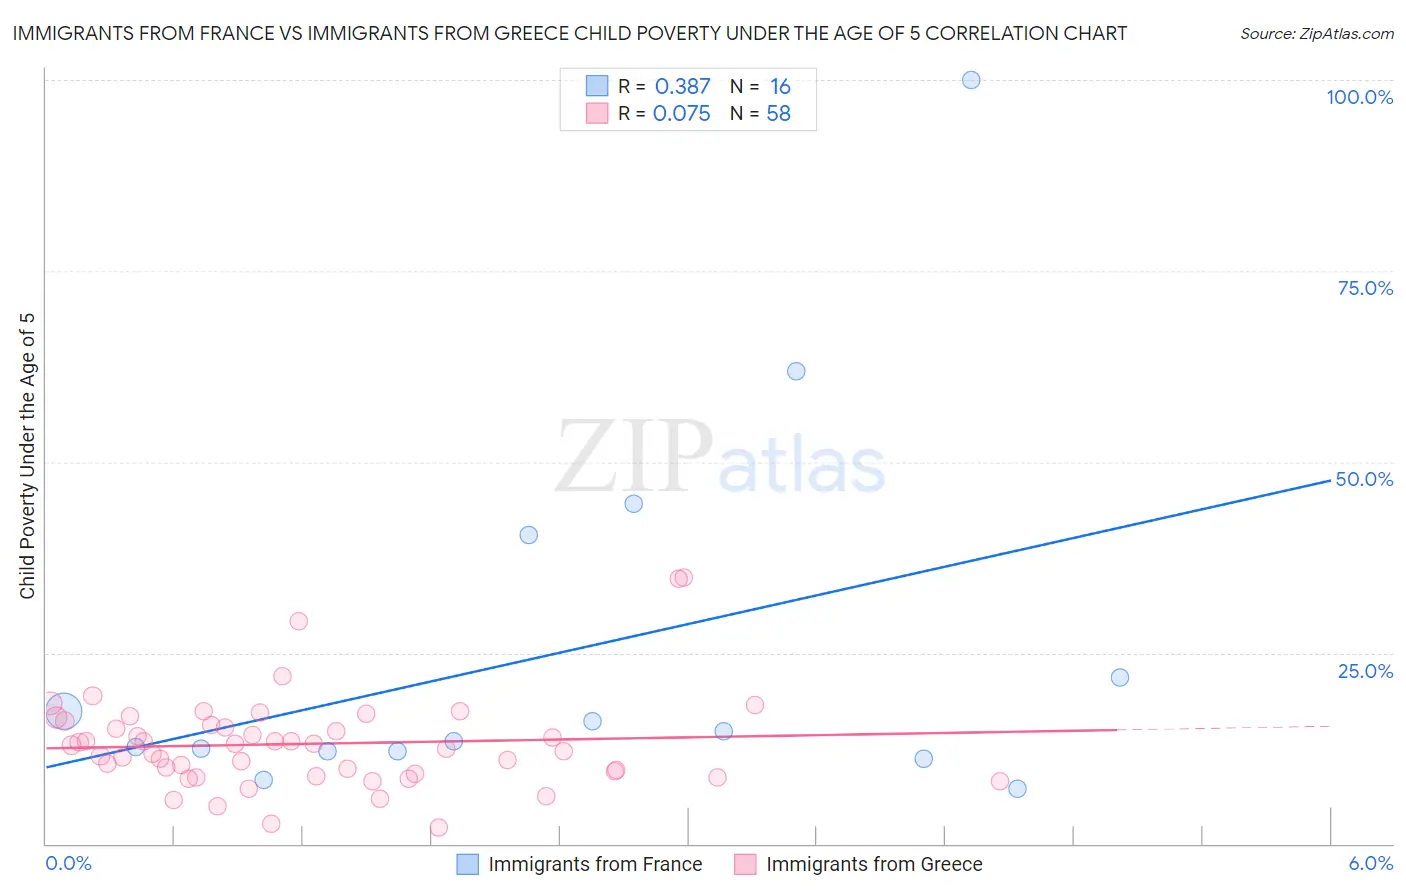 Immigrants from France vs Immigrants from Greece Child Poverty Under the Age of 5